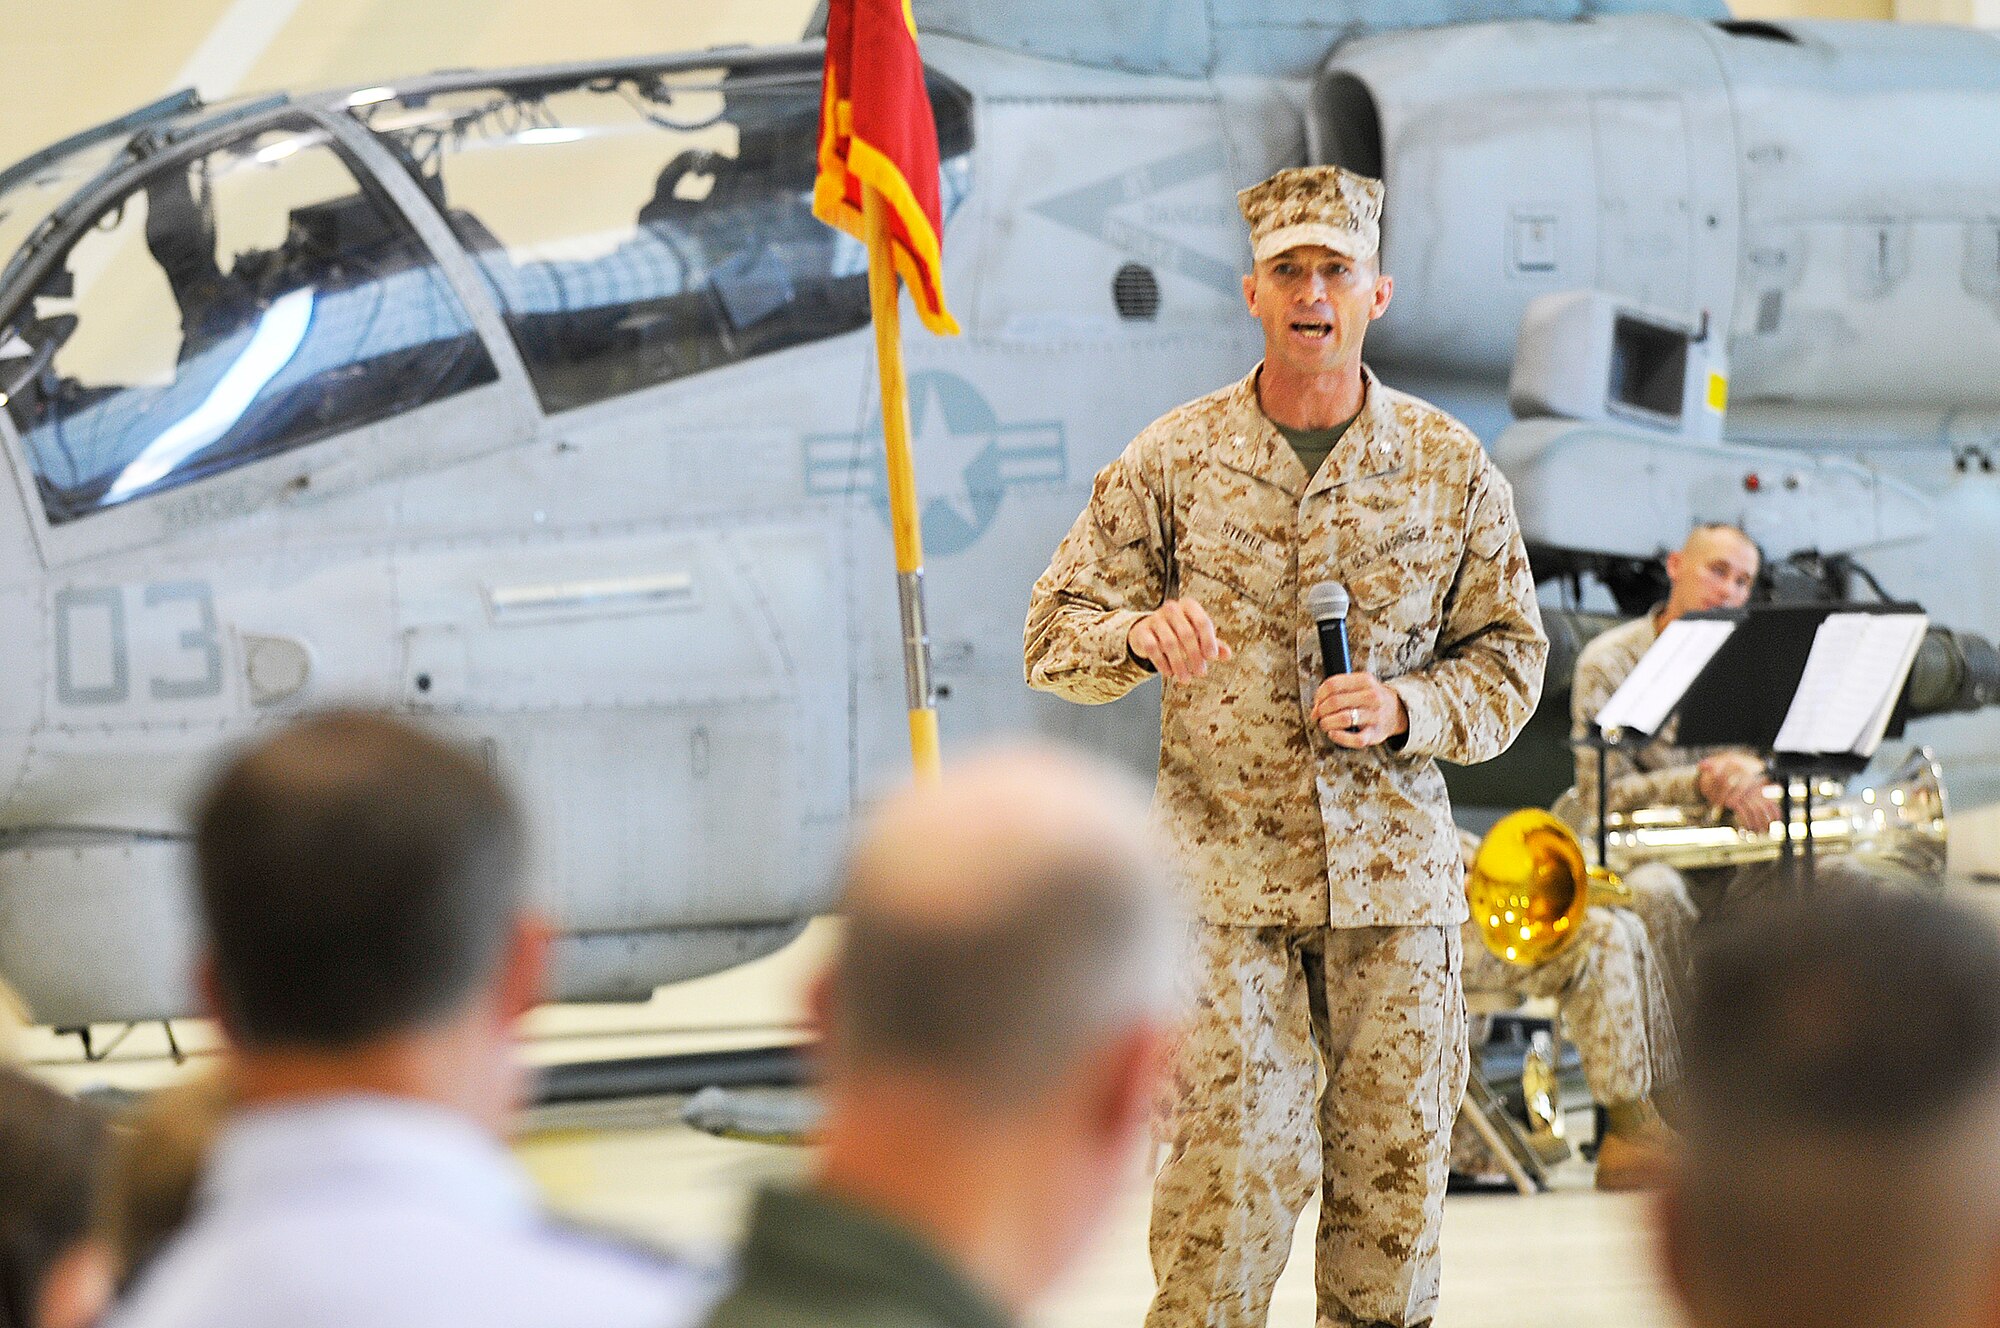 Lt. Col. David M. Steele makes remarks after assuming command of Marine Aircraft Group 49, Det. A, Monday.  (U. S. Air Force photo/Sue Sapp)